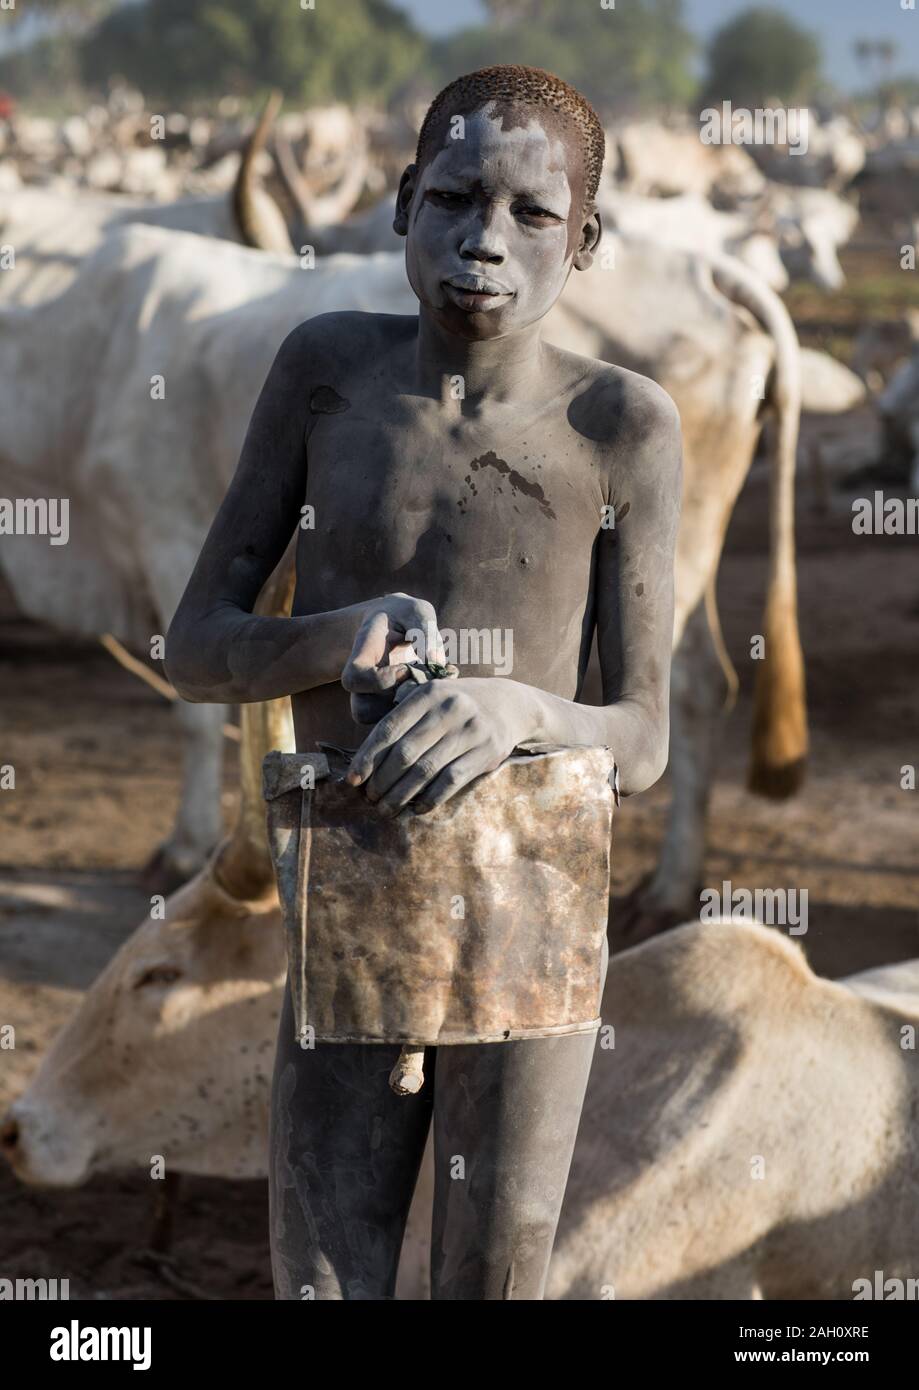 Mundari tribe boy with a bell taking care of the cows in the camp, Central Equatoria, Terekeka, South Sudan Stock Photo